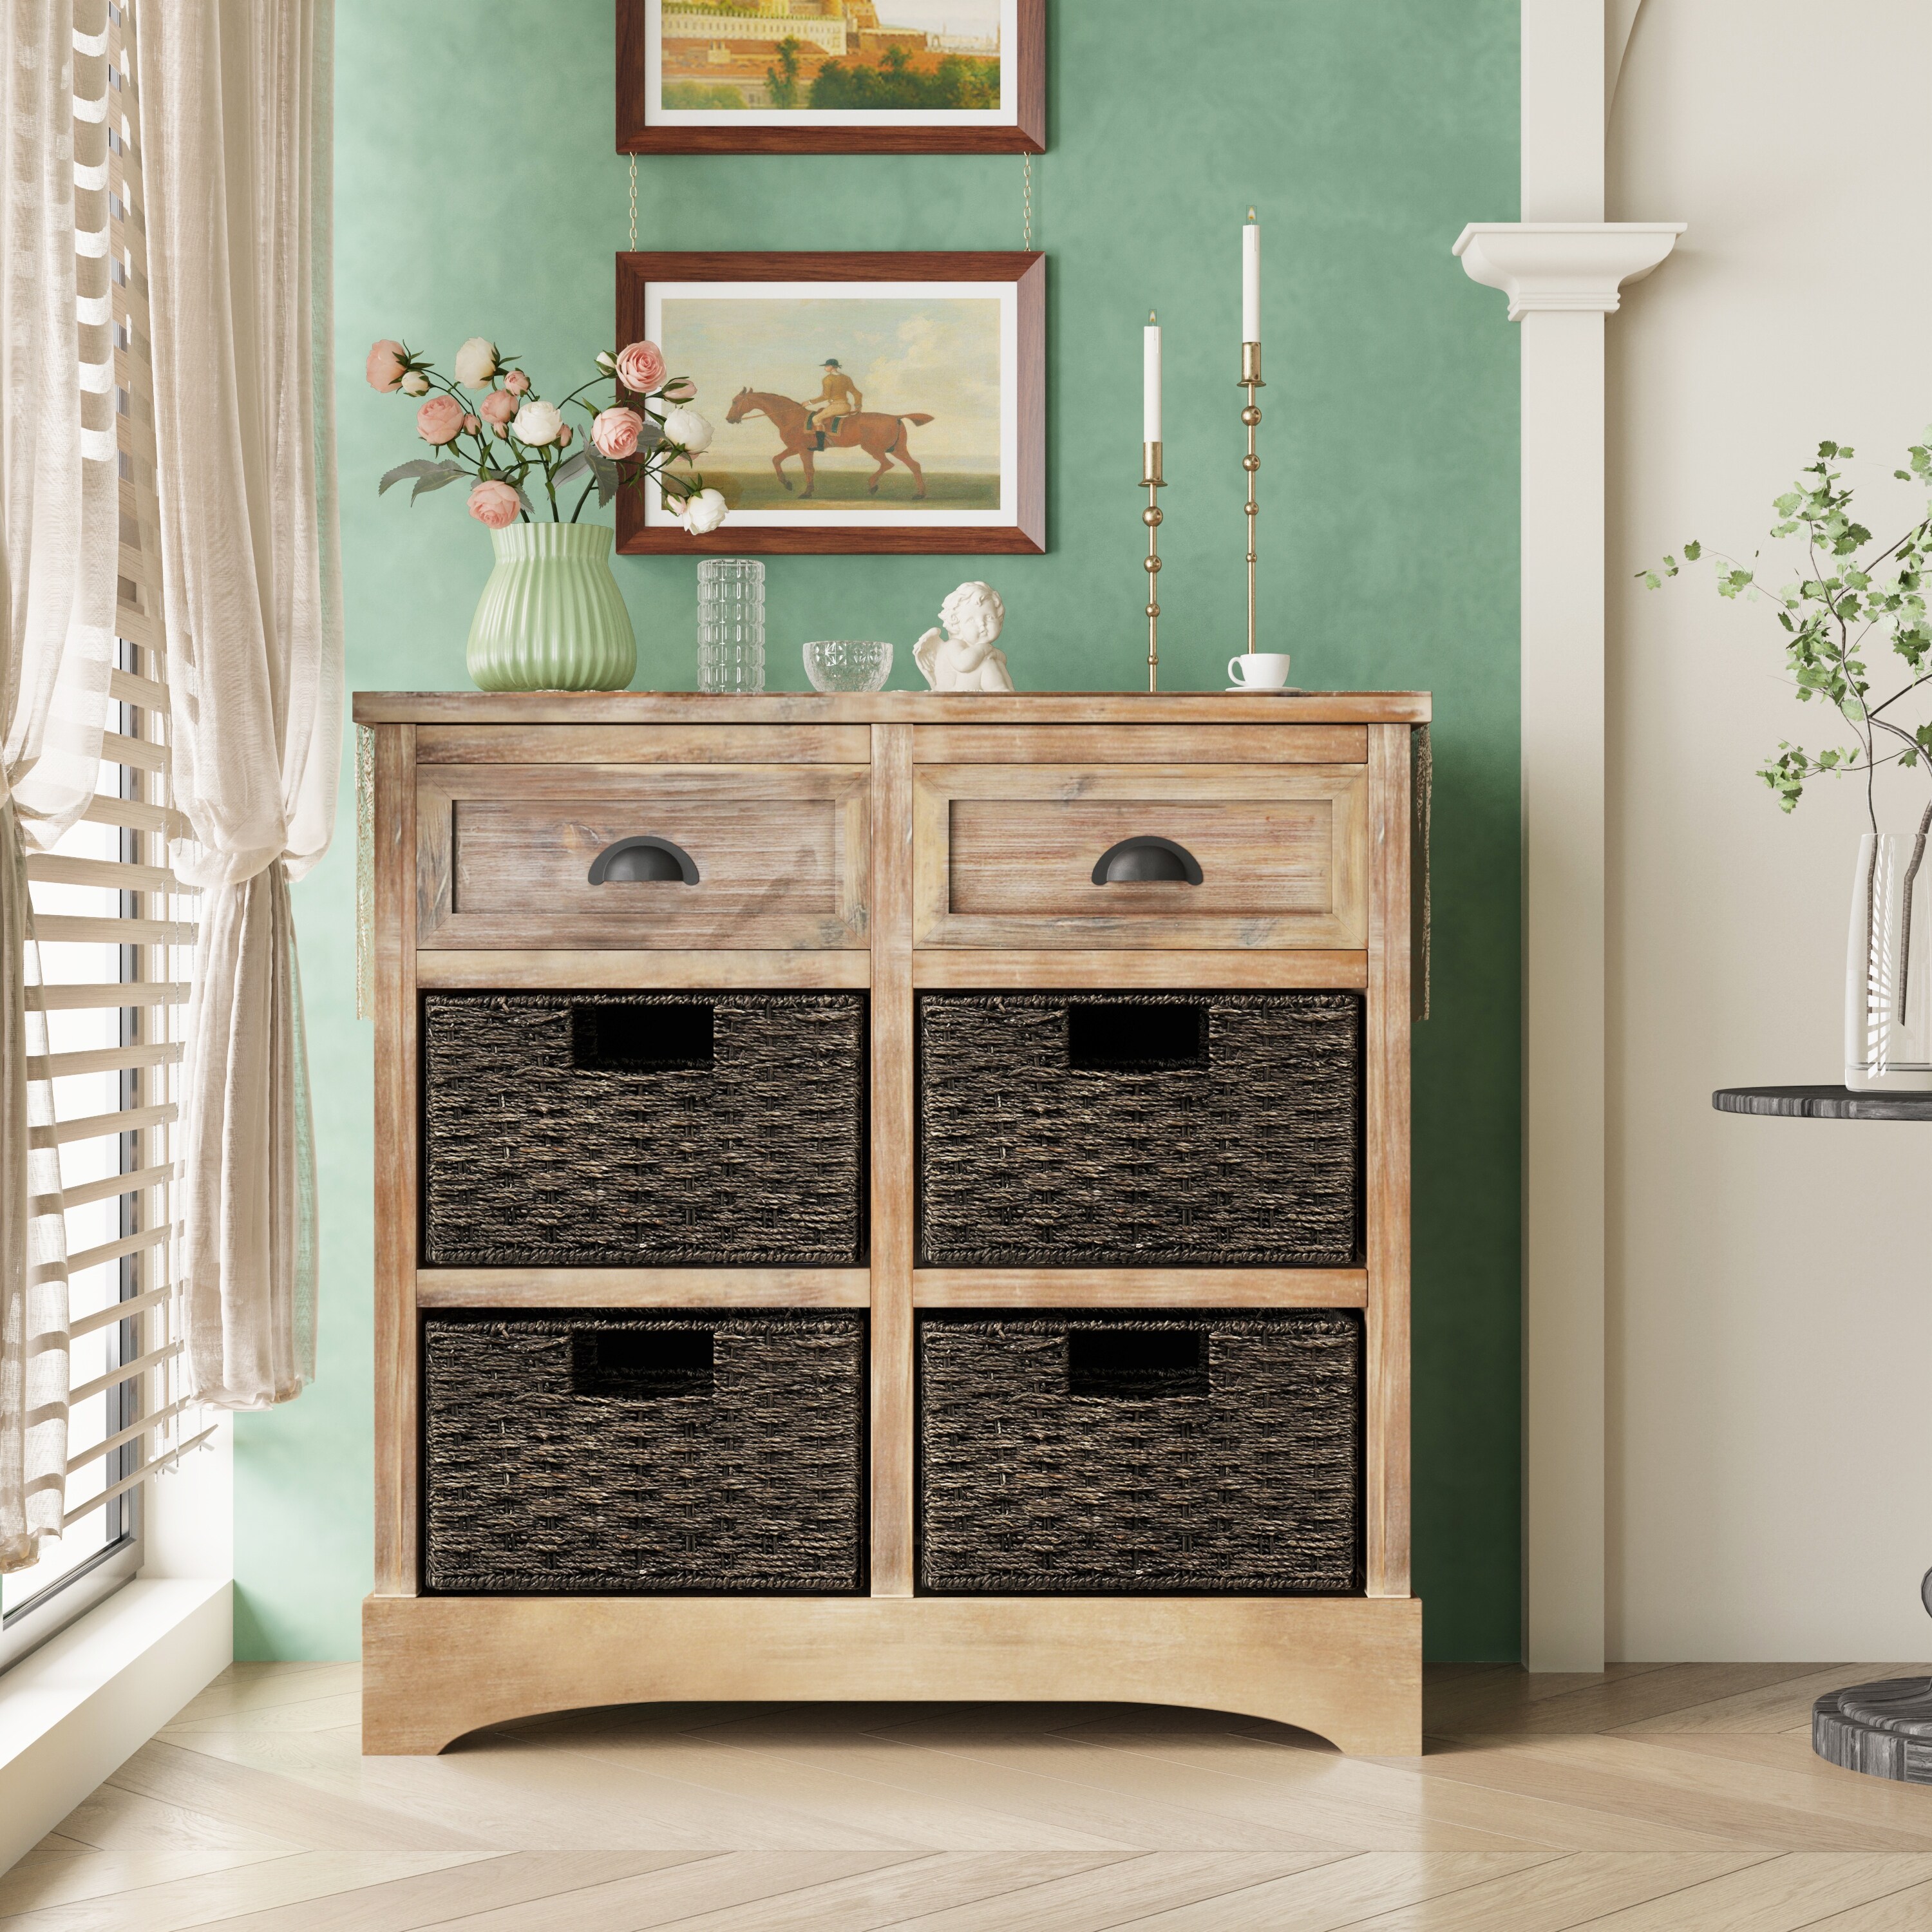 https://ak1.ostkcdn.com/images/products/is/images/direct/03ac3ebaa4ac08e648502a674a5b9e143a43d430/Rustic-Storage-Cabinet-with-Two-Drawers-and-Four-Classic-Rattan-Basket-for-Dining-Room-Living-Room.jpg